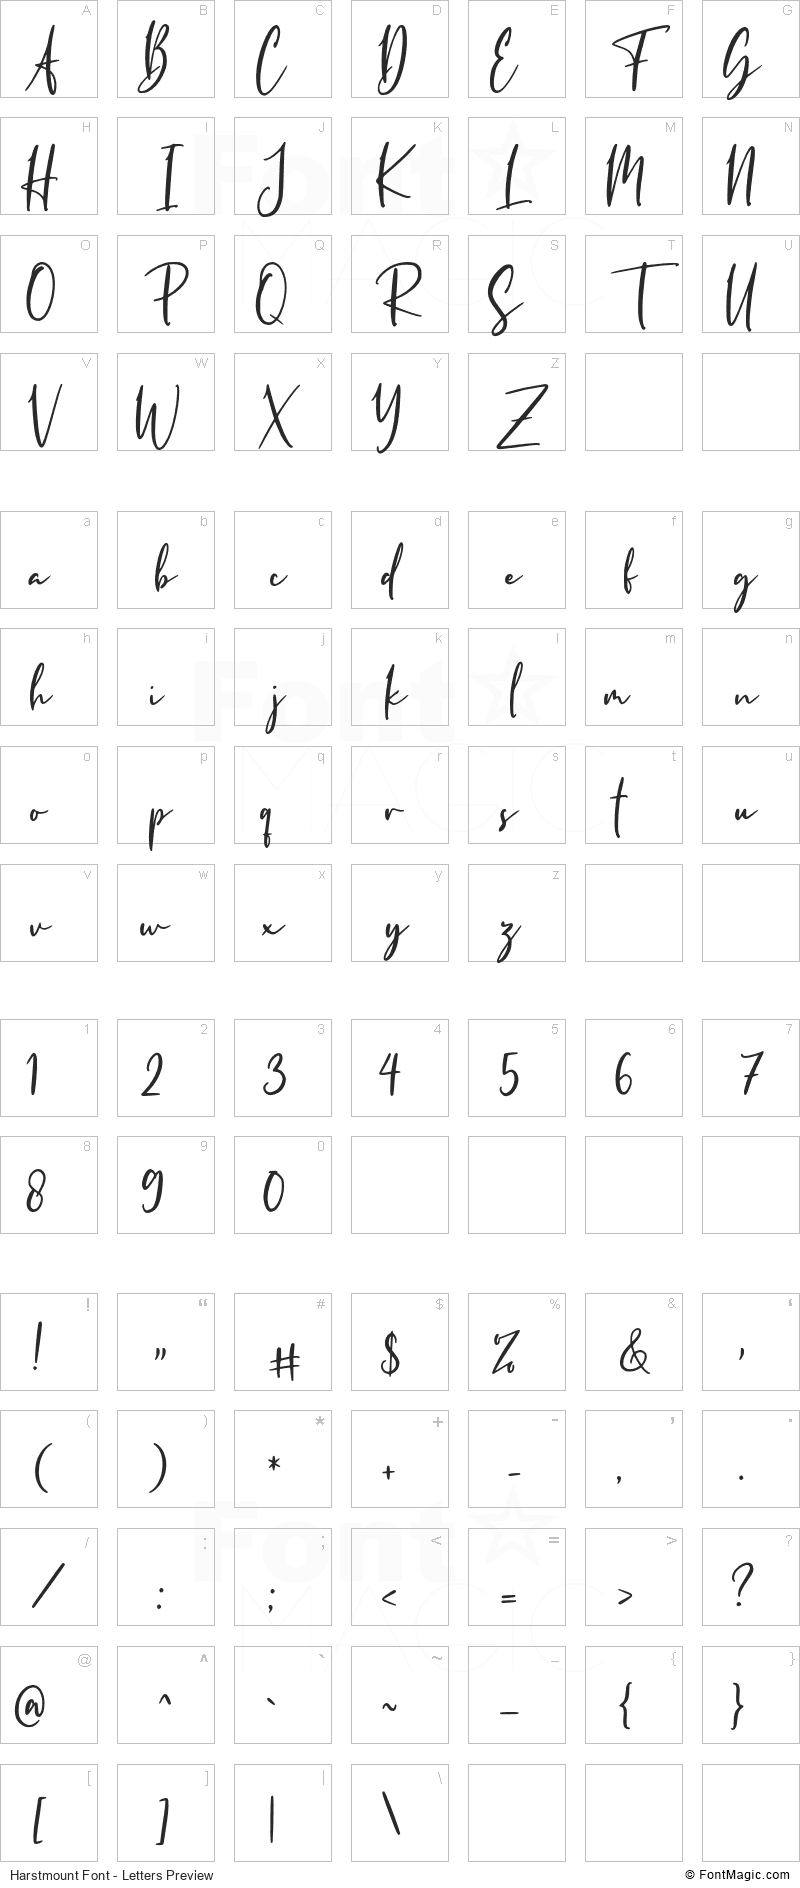 Harstmount Font - All Latters Preview Chart